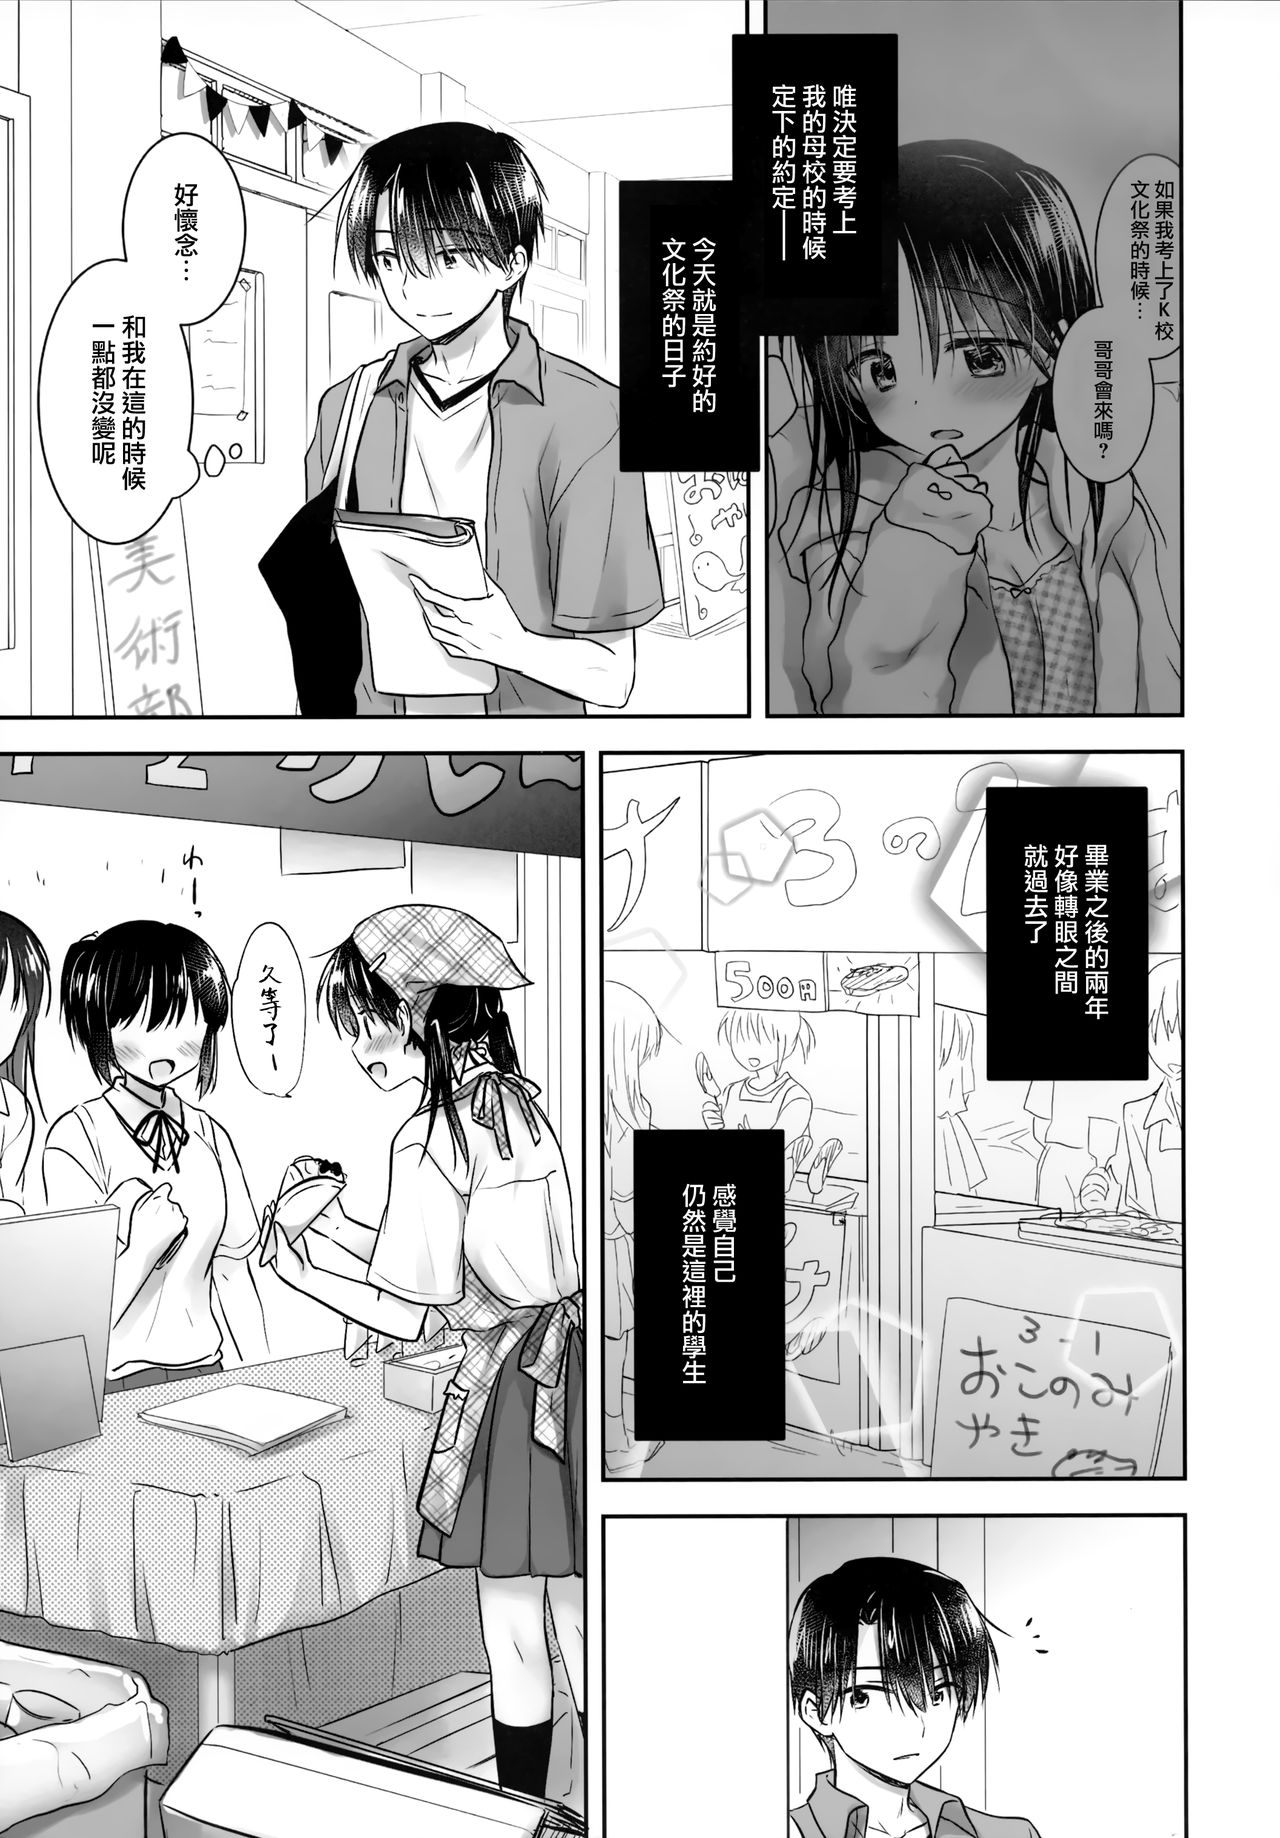 (C96) [Aquadrop (Mikami Mika)] Omoide Sex [Chinese] [山樱汉化] page 10 full